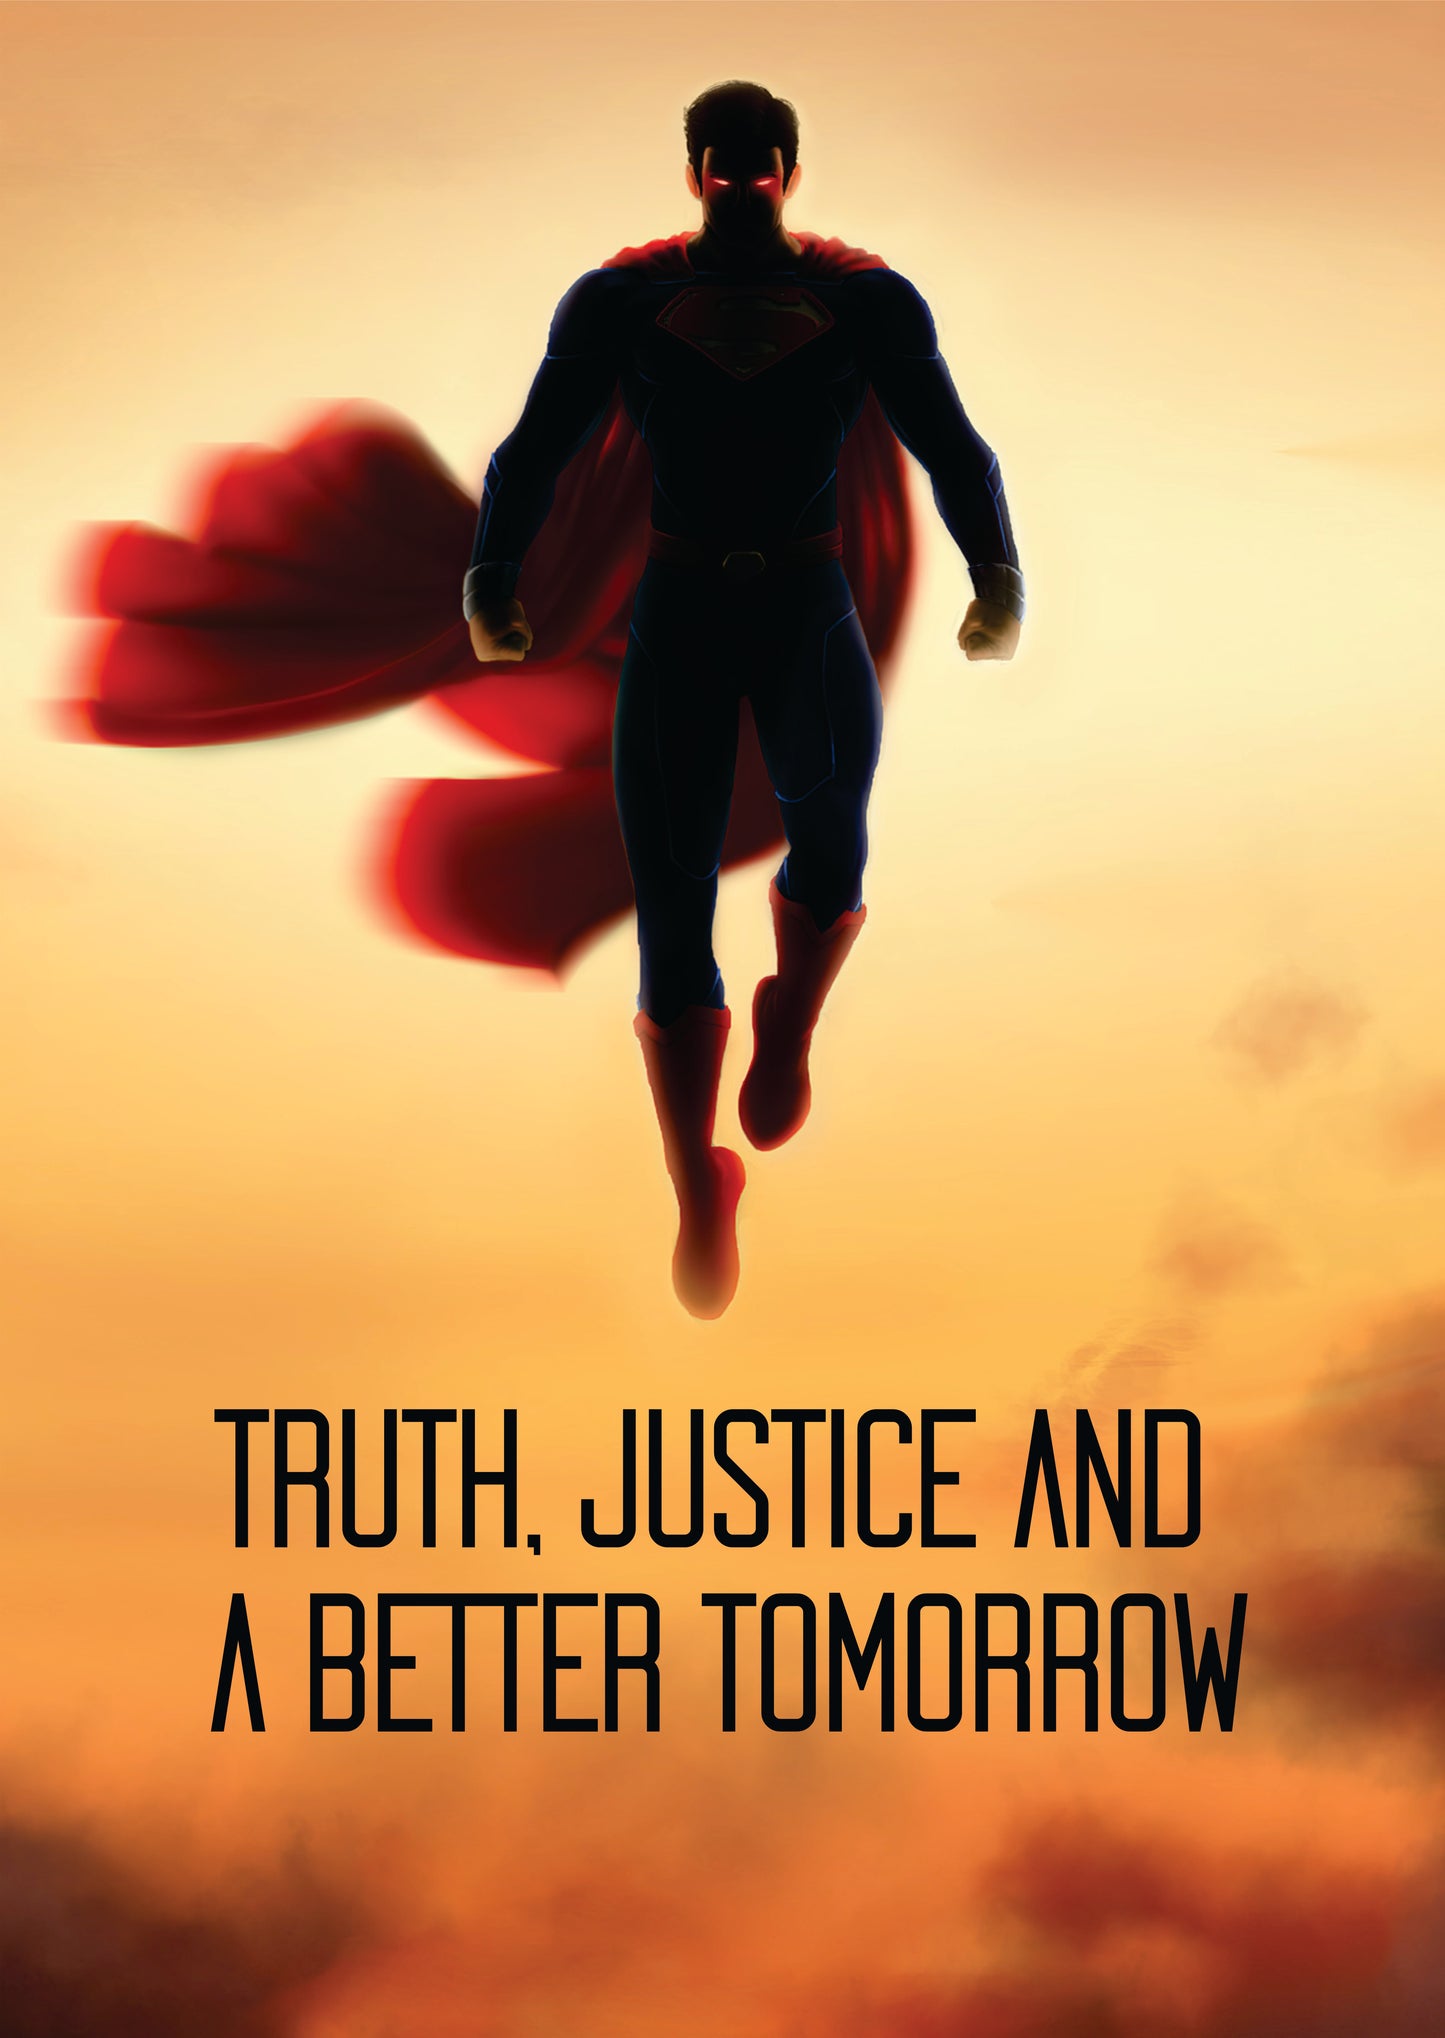 Superman - Truth, Justice and A Better Tomorrow